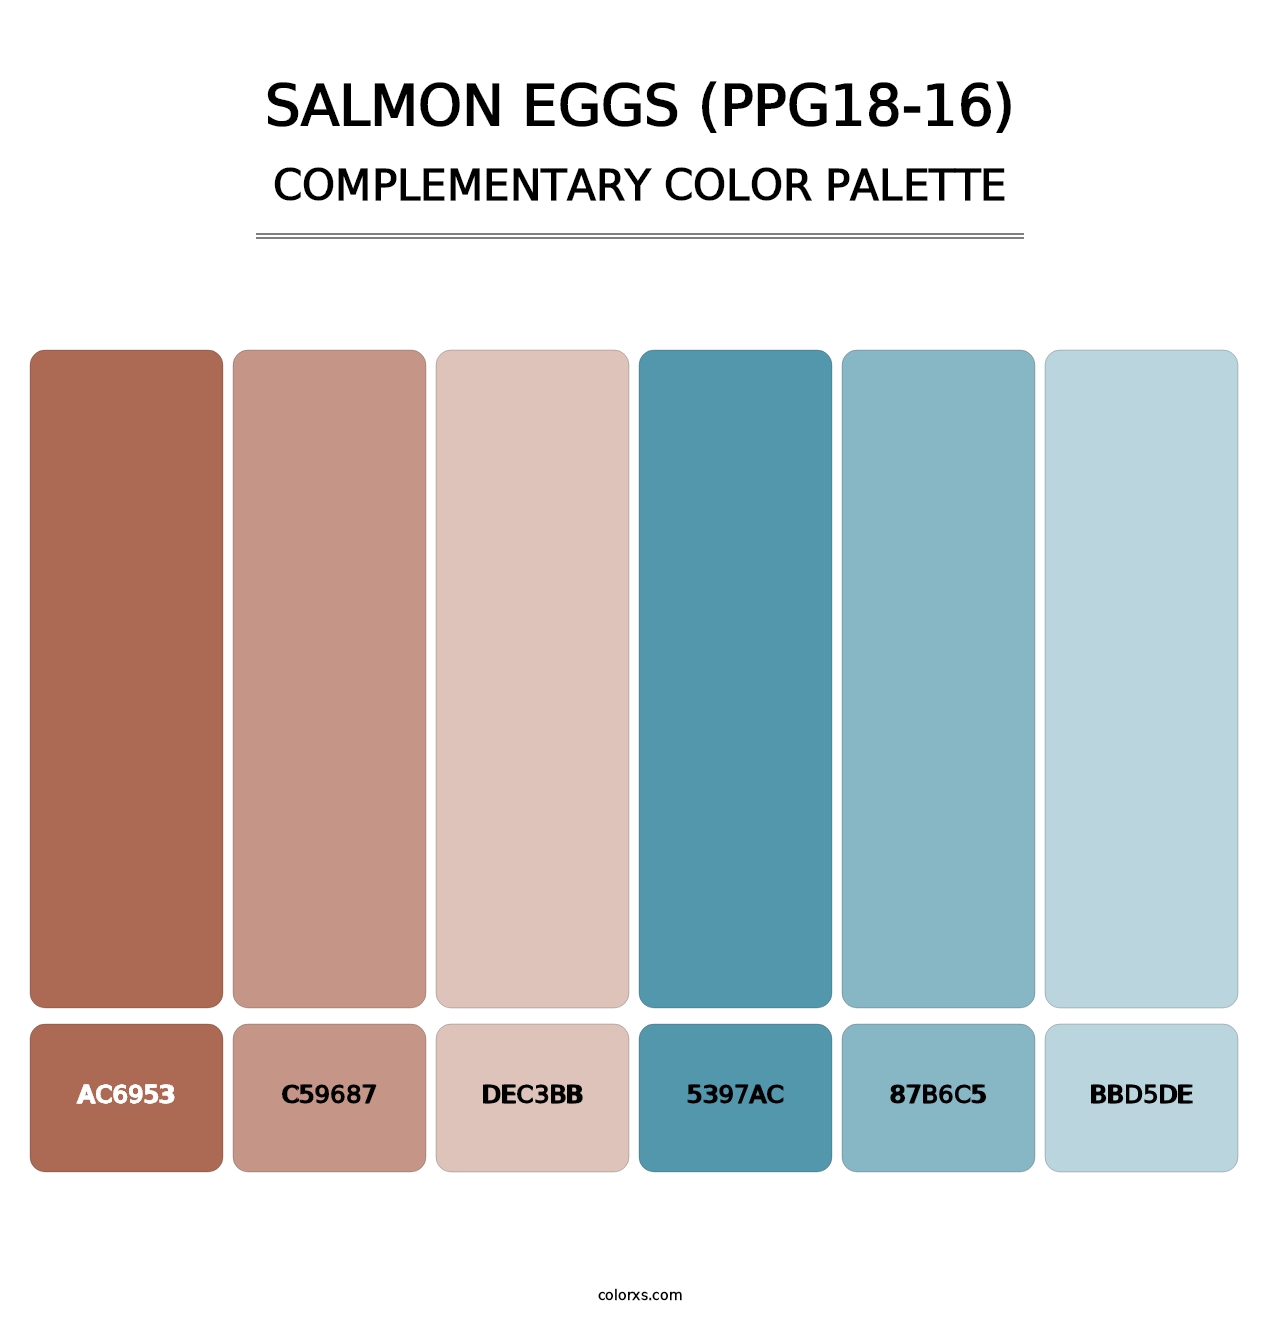 Salmon Eggs (PPG18-16) - Complementary Color Palette